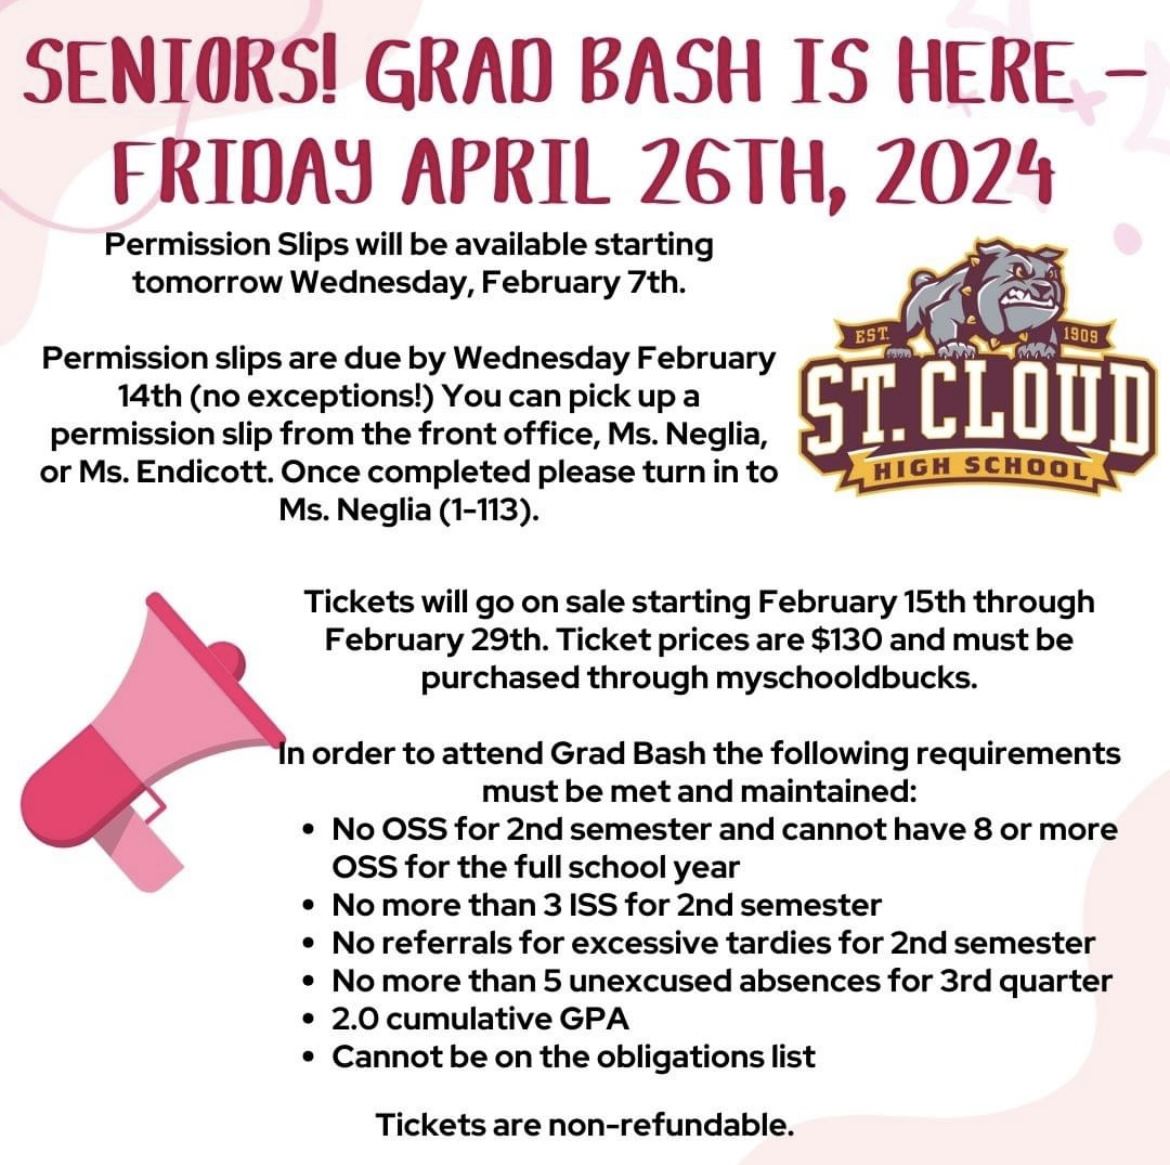  Flyers that says Seniors - Grad Bash is Here